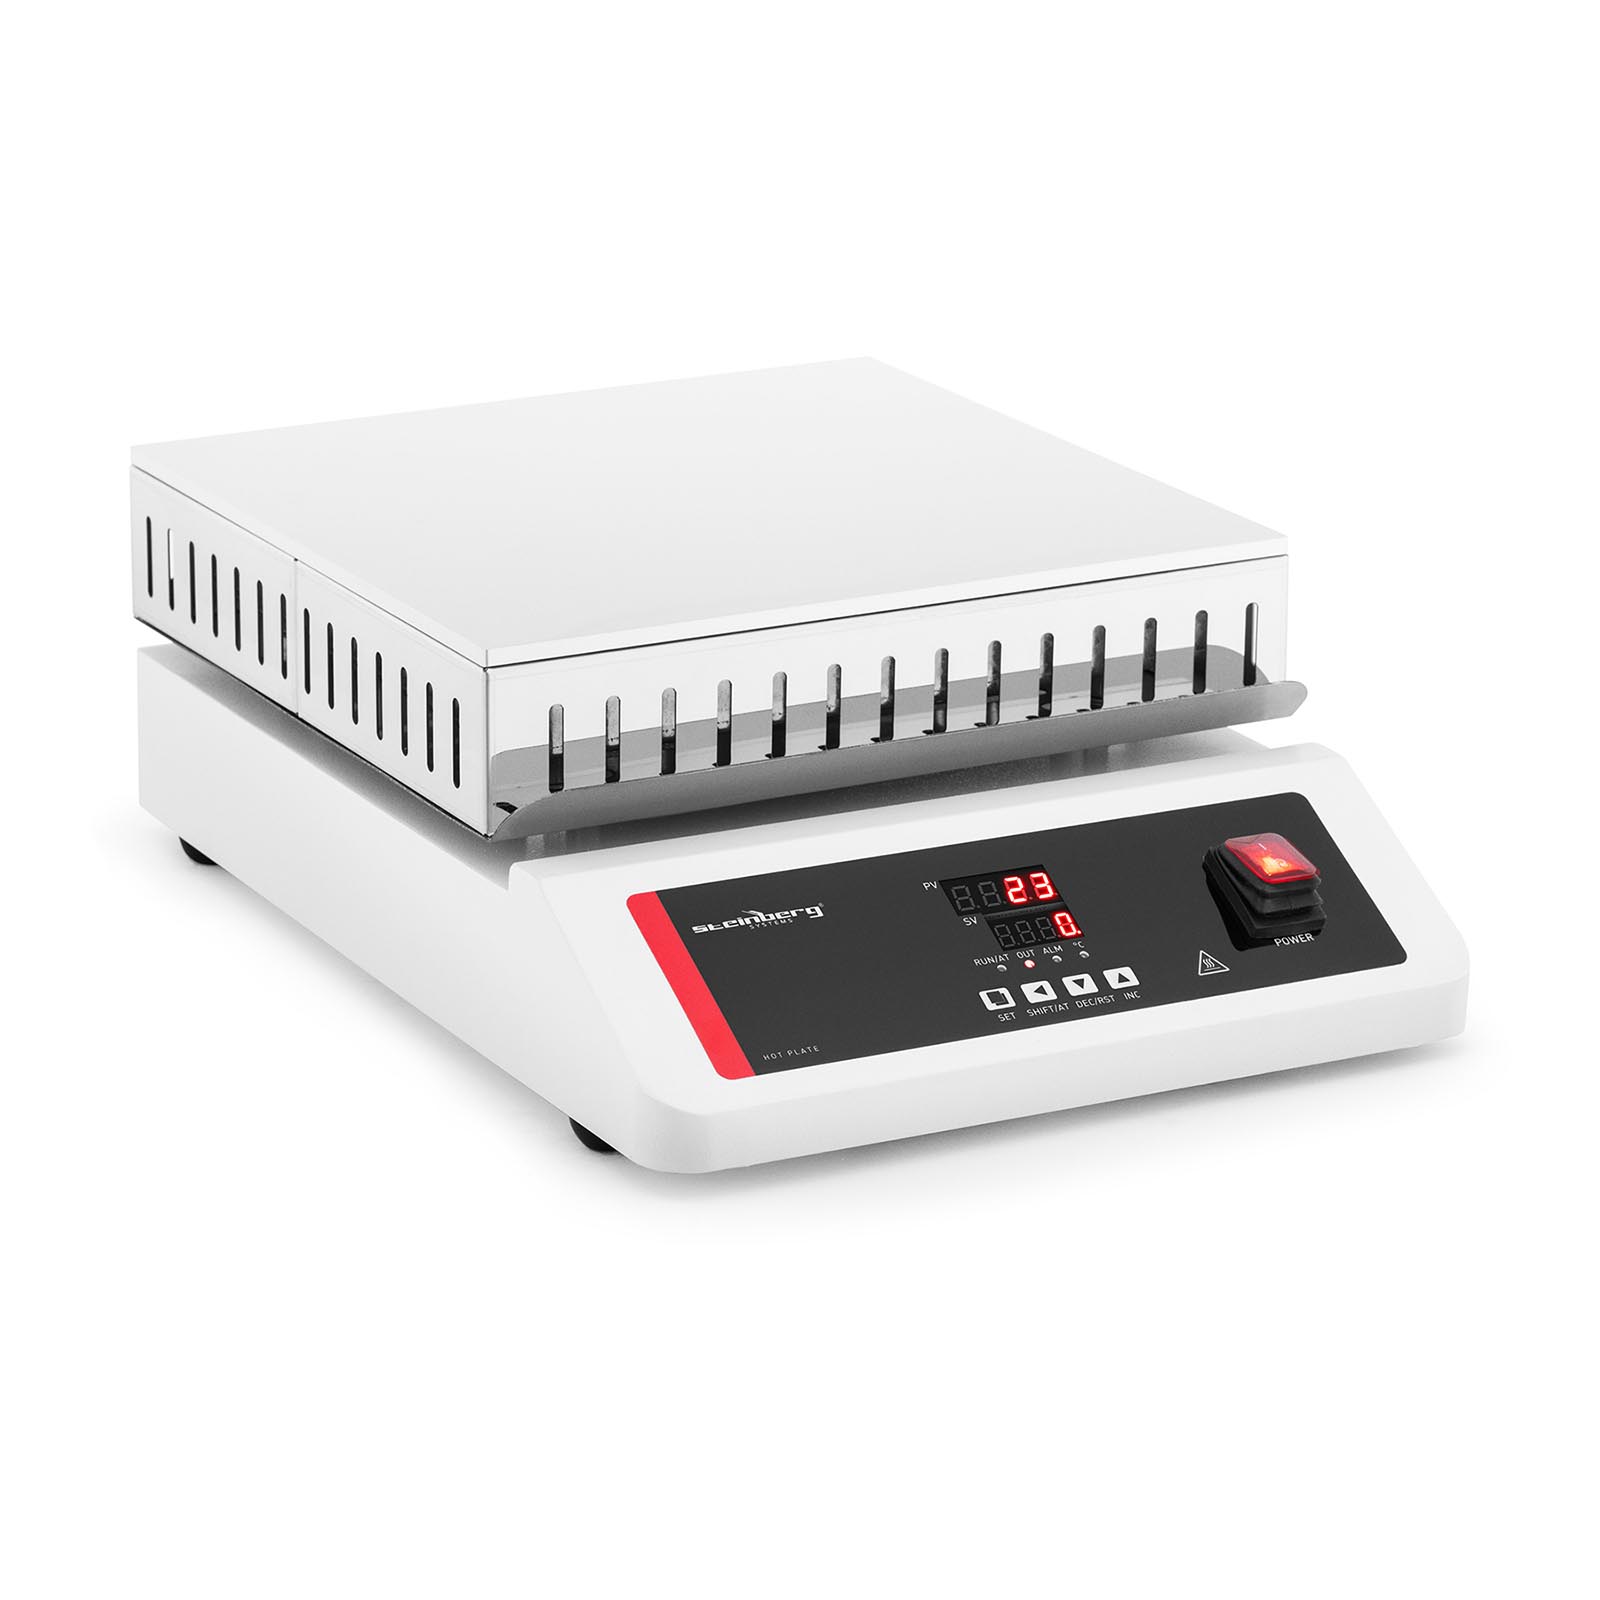 Hot plate laboratory - 30 x 30 cm - up to 350 °C - 20 kg